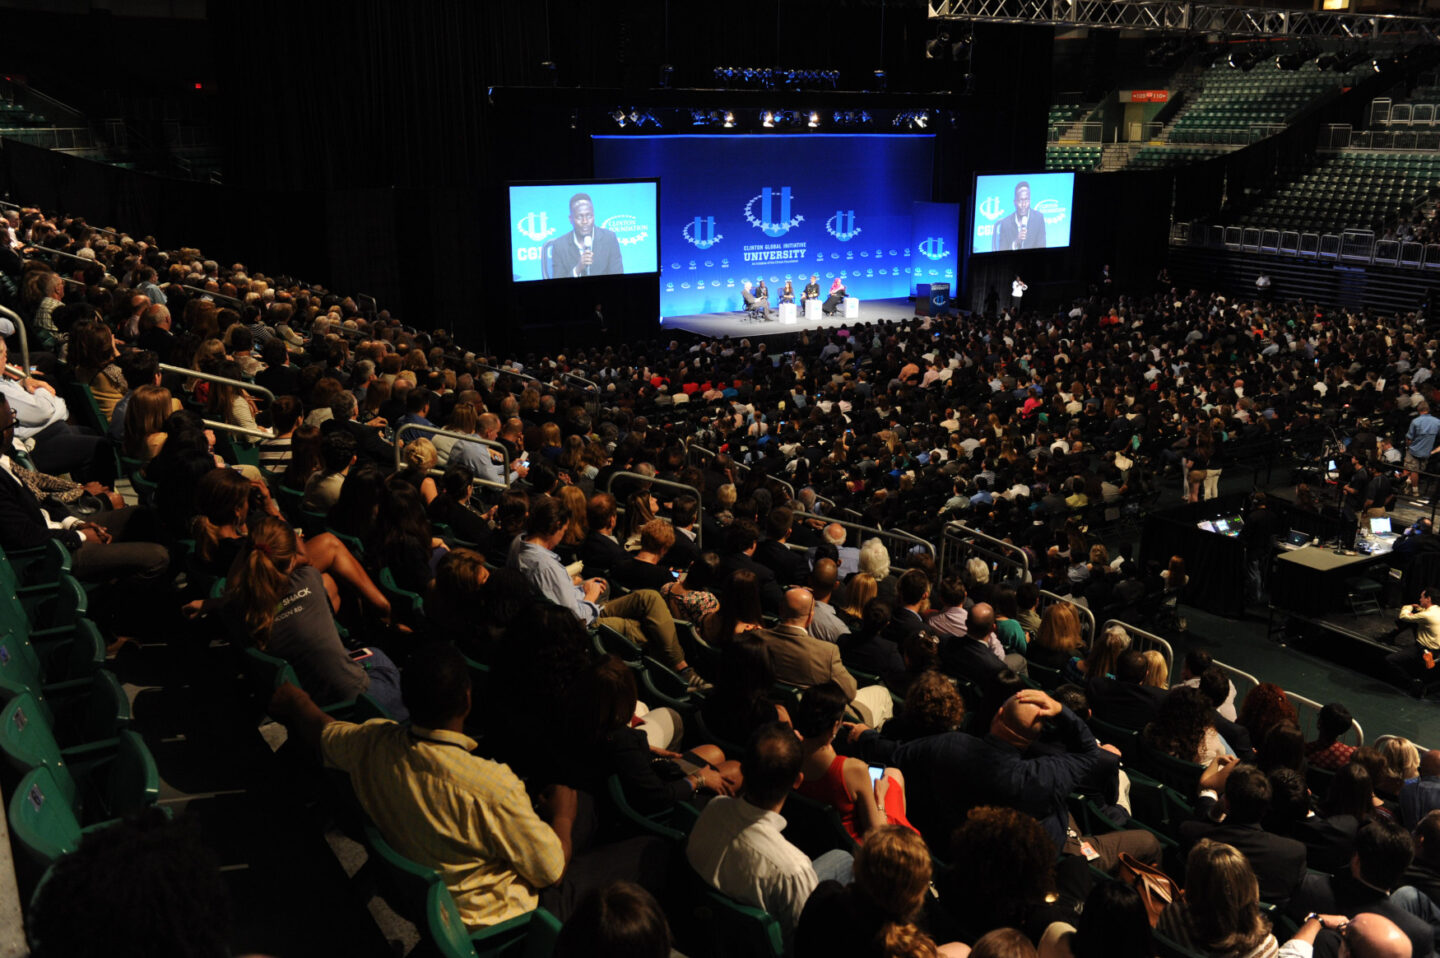 Students and guests watch a plenary session at the University of Miami